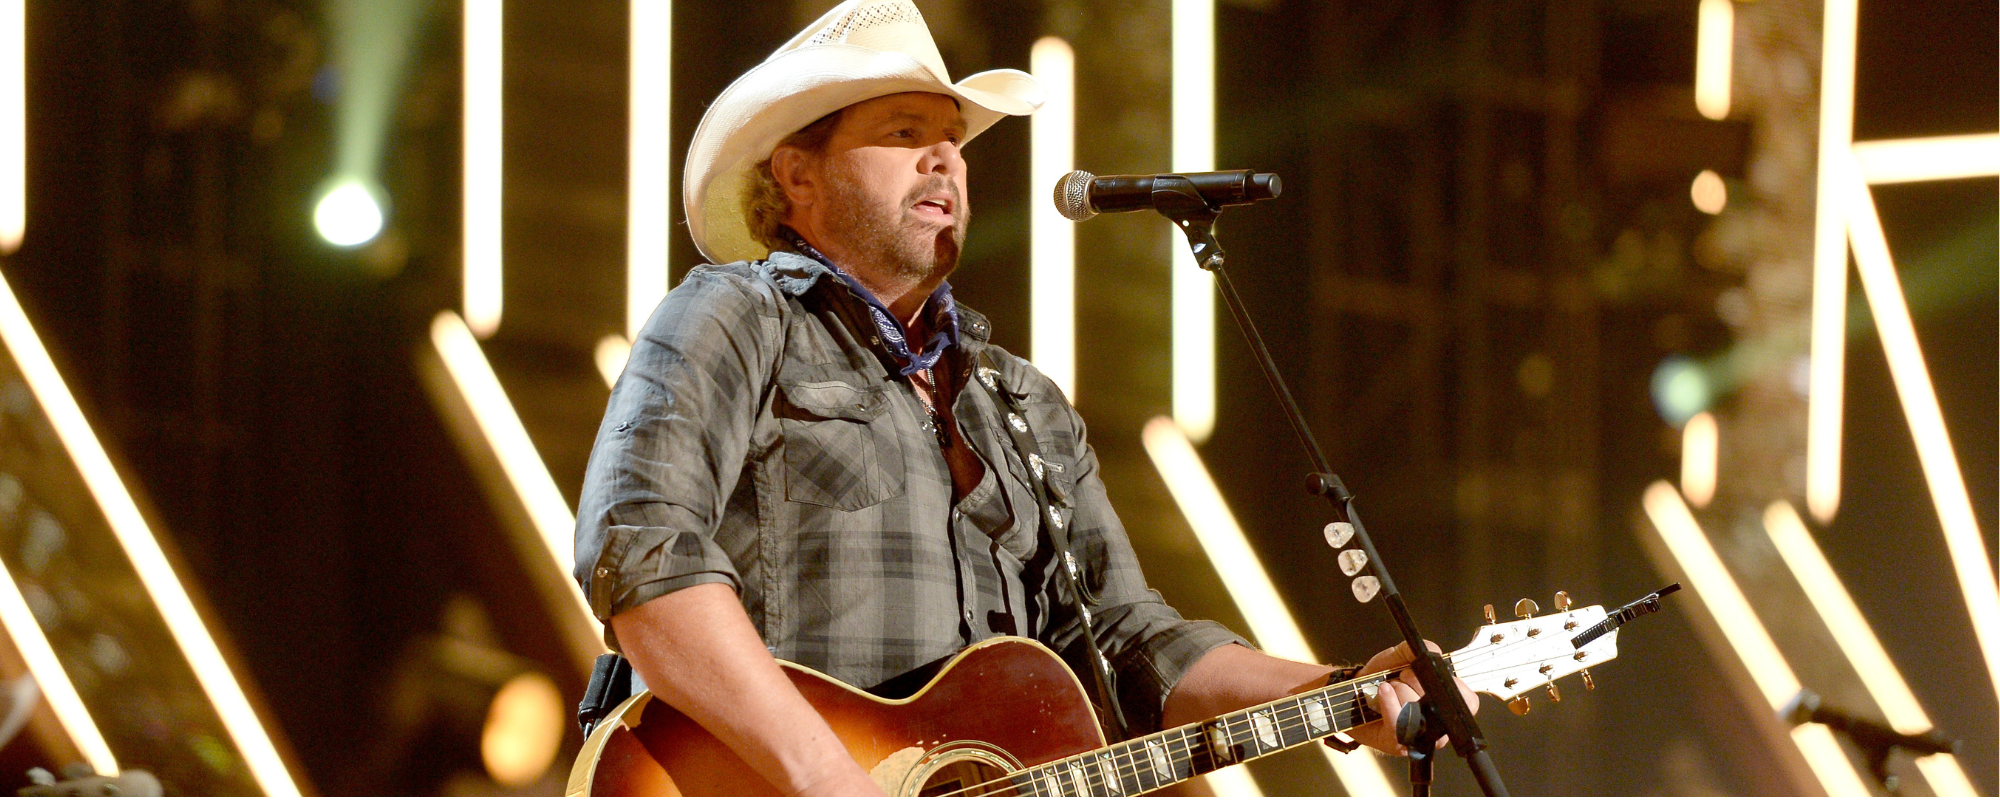 Toby Keith Adds Las Vegas Show Due to High Ticket Demand: “I’m Fired Up About These Shows and Clearly You Are Too”